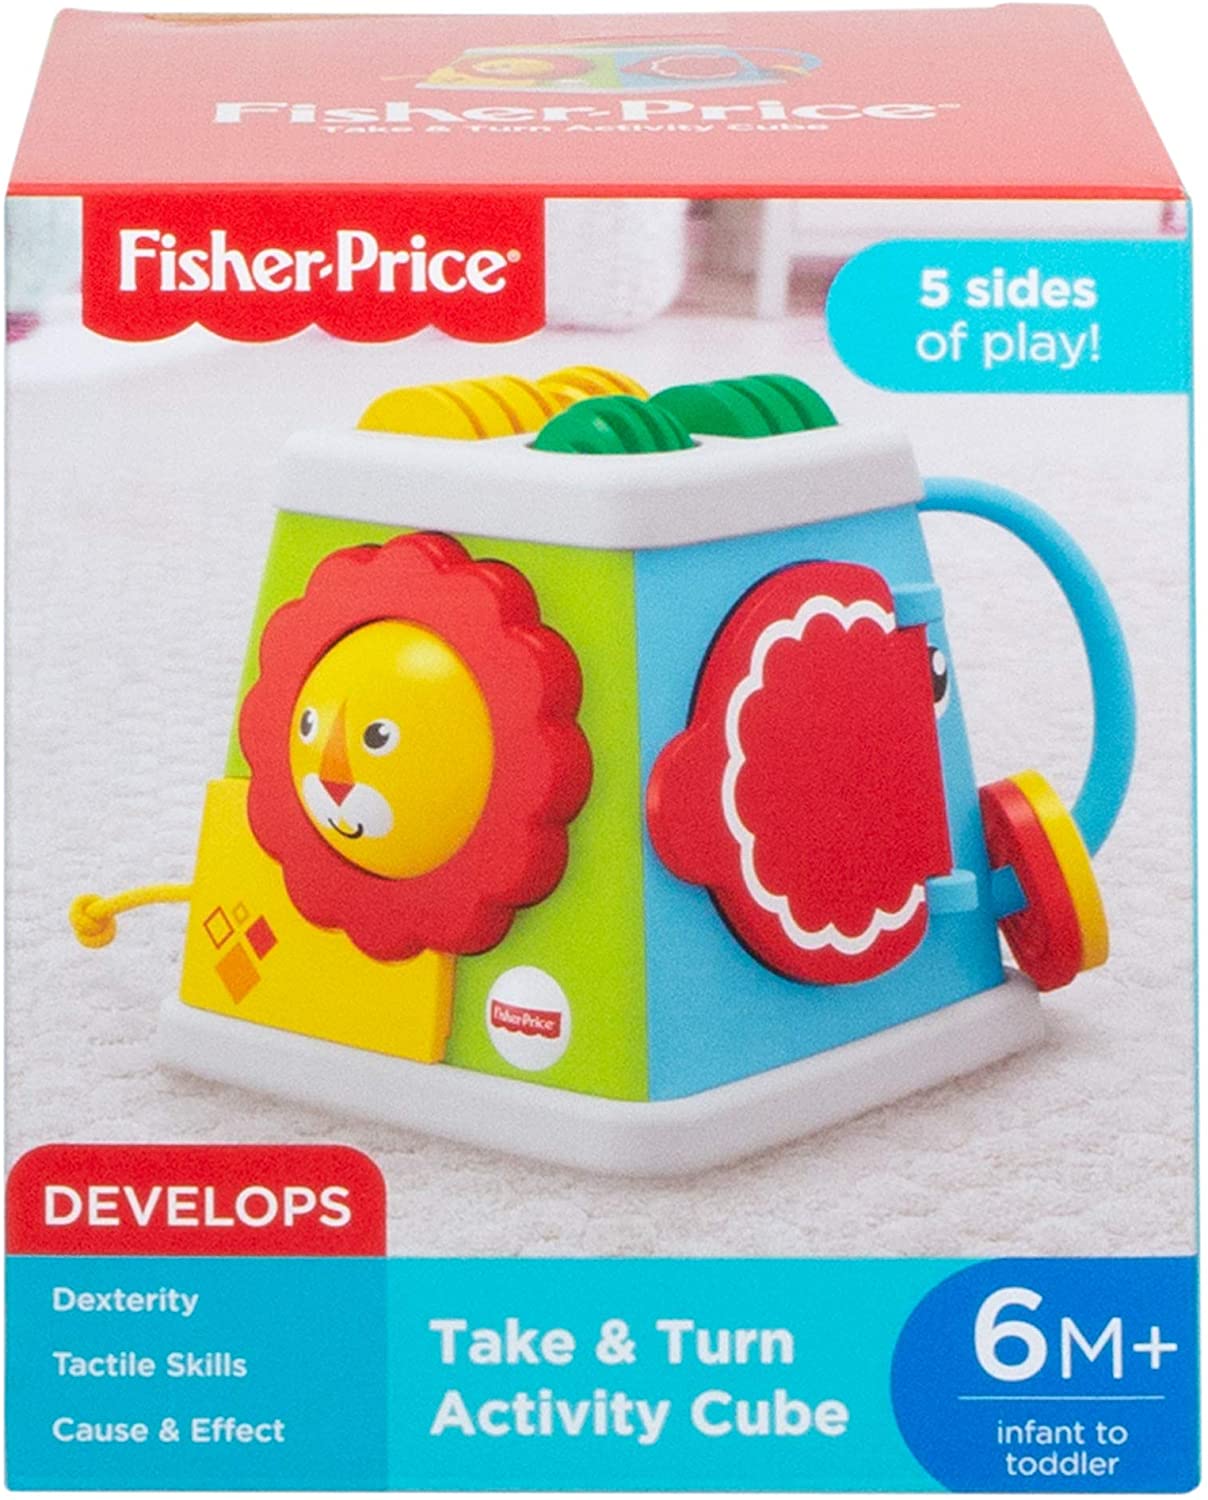 Fisher-Price 5 Sided Activity Cube Baby Activity Toy